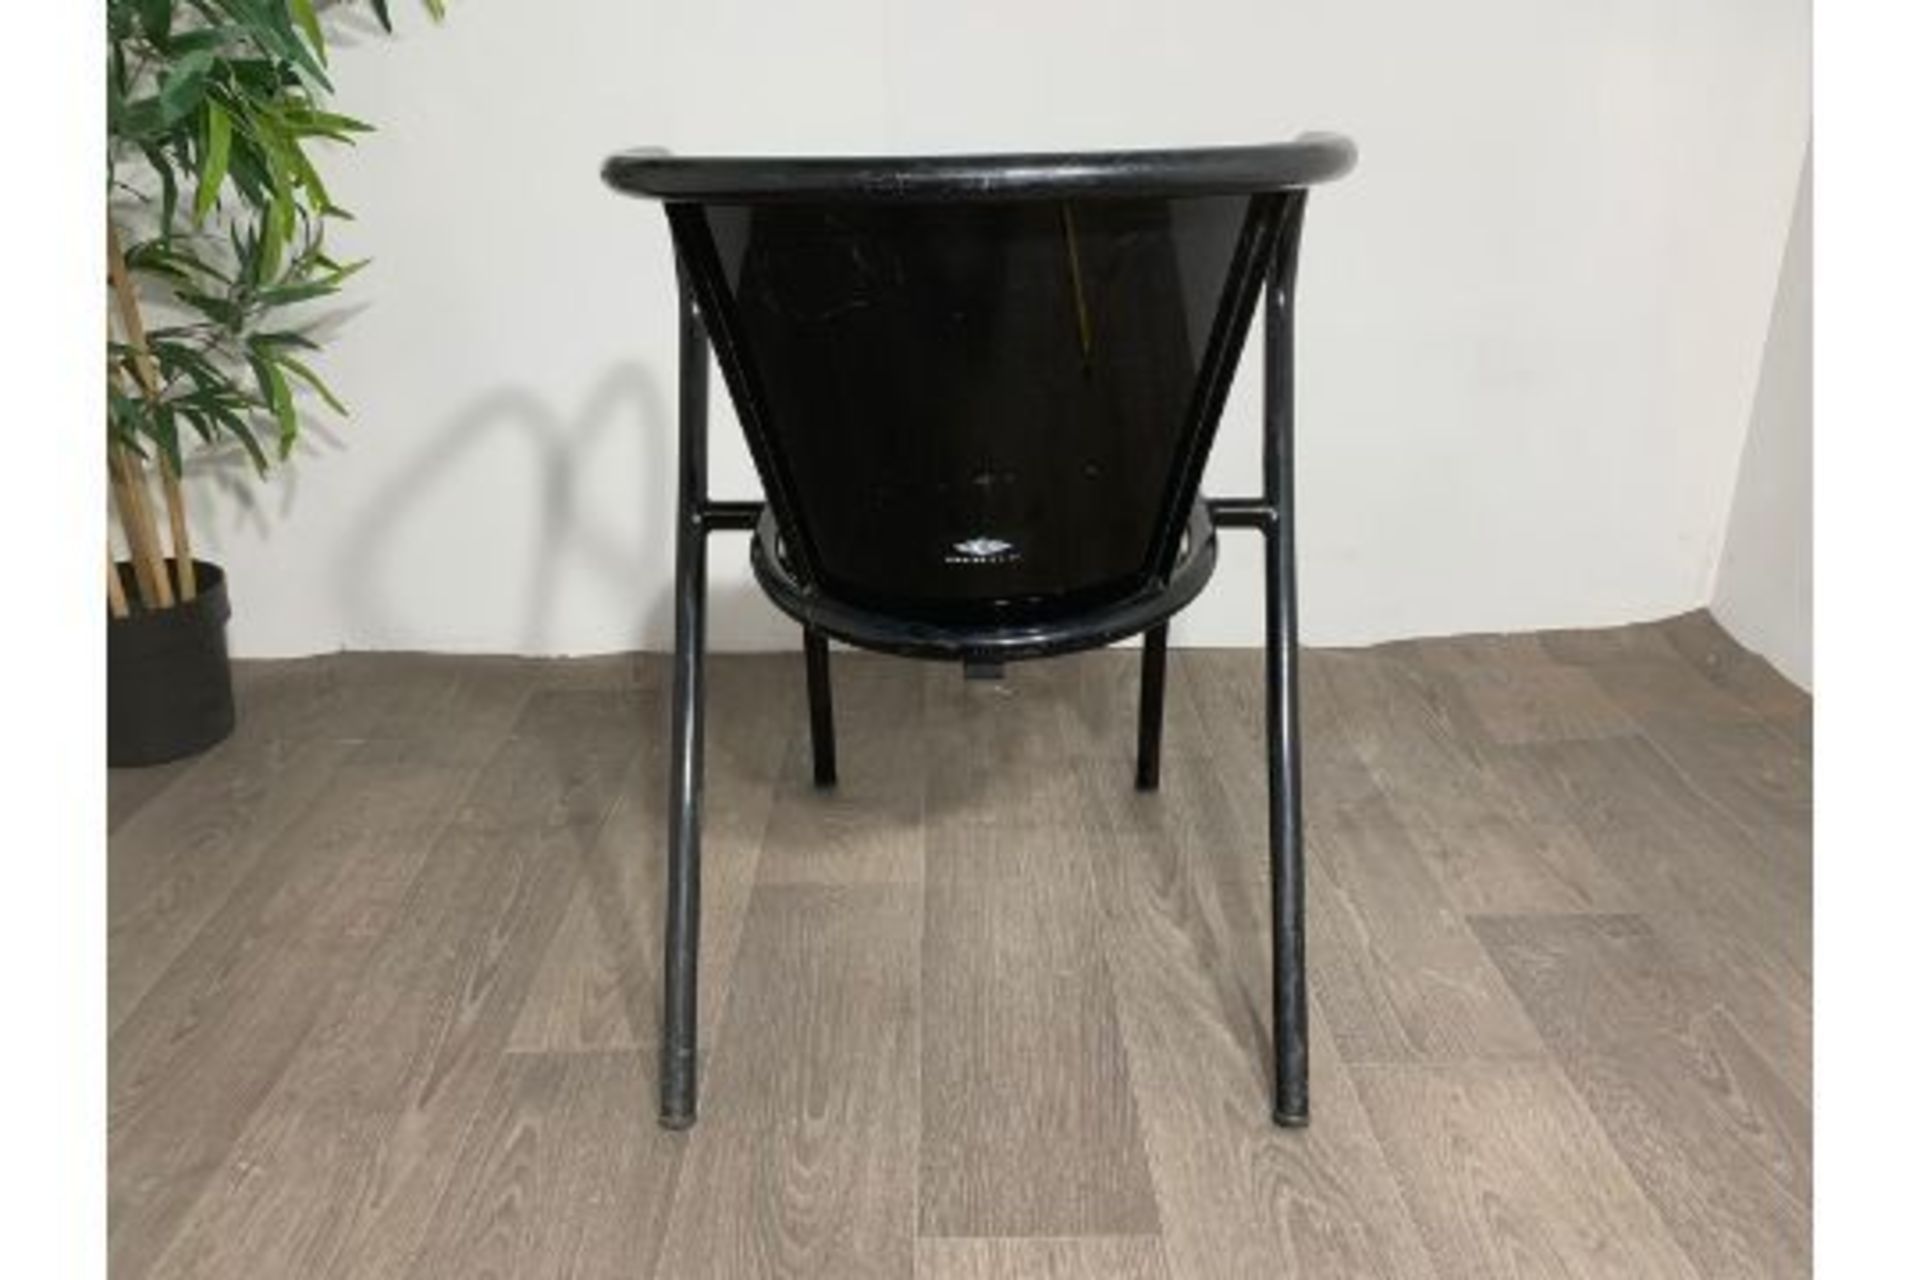 Adico 5008 Black Chair With Wooden Seat x4 - Image 3 of 6